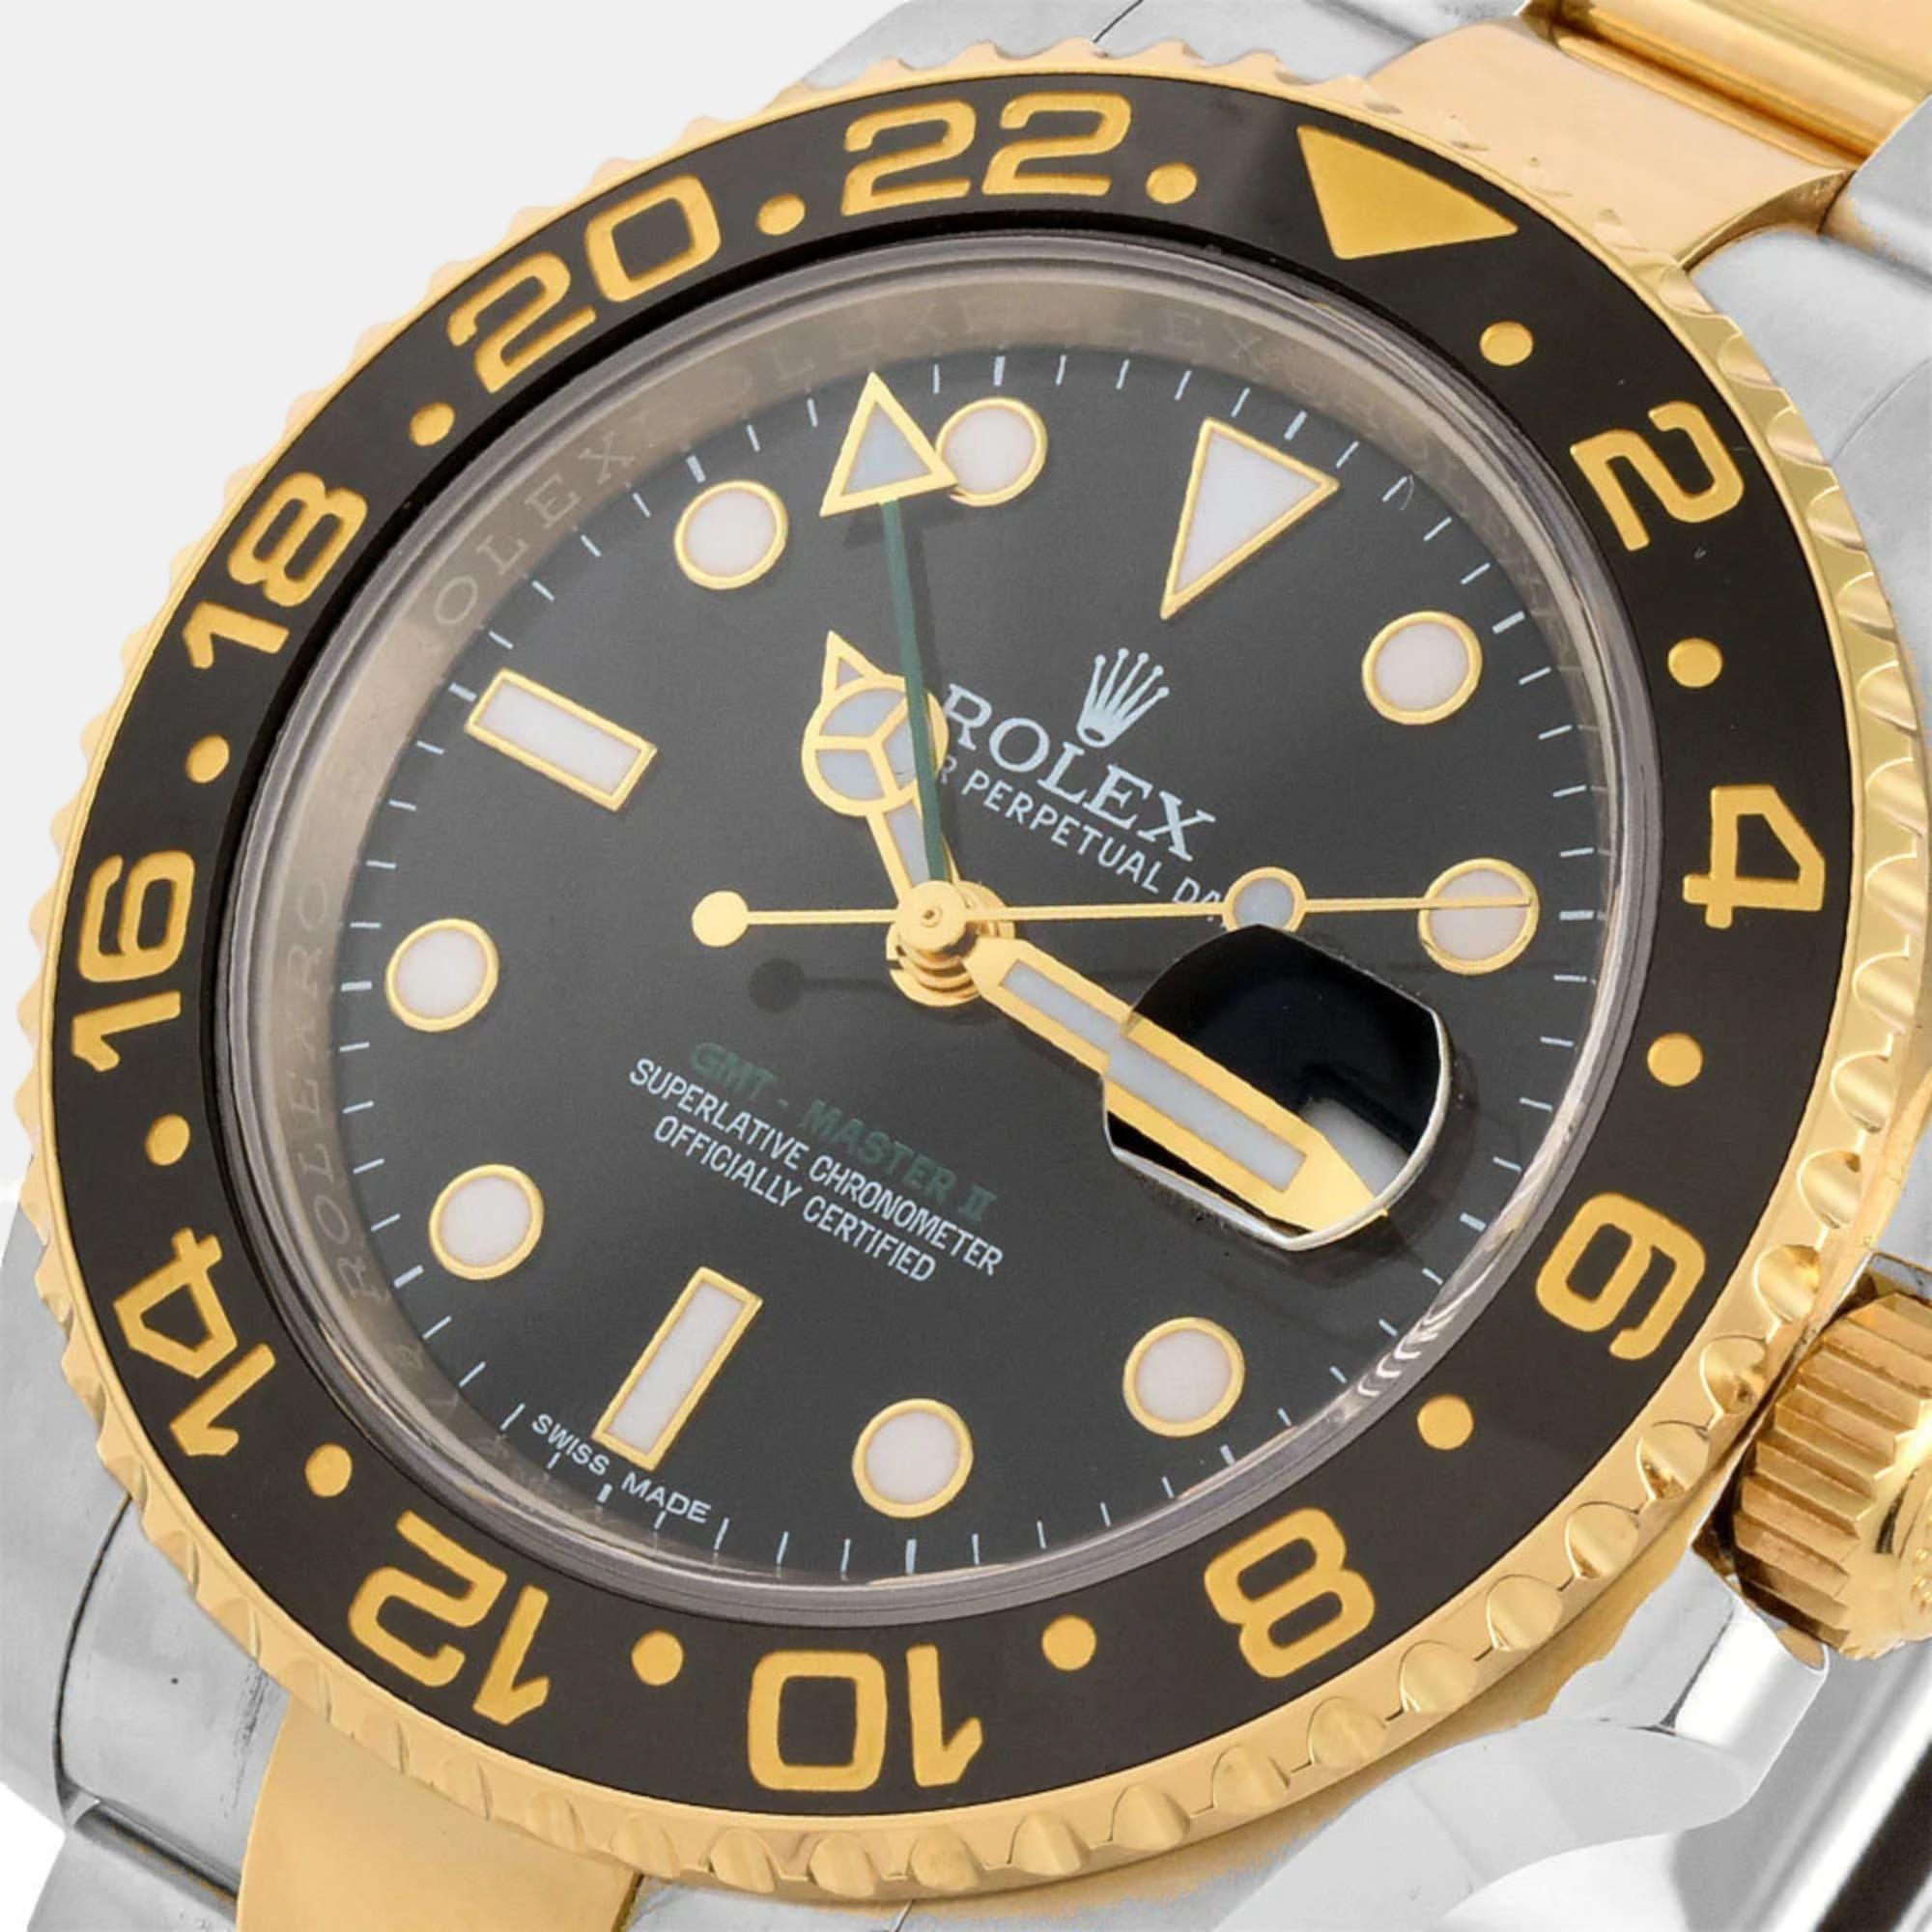 

Rolex Black 18k Yellow Gold And Stainless Steel GMT-Master II 116713LN Automatic Men's Wristwatch 40 mm